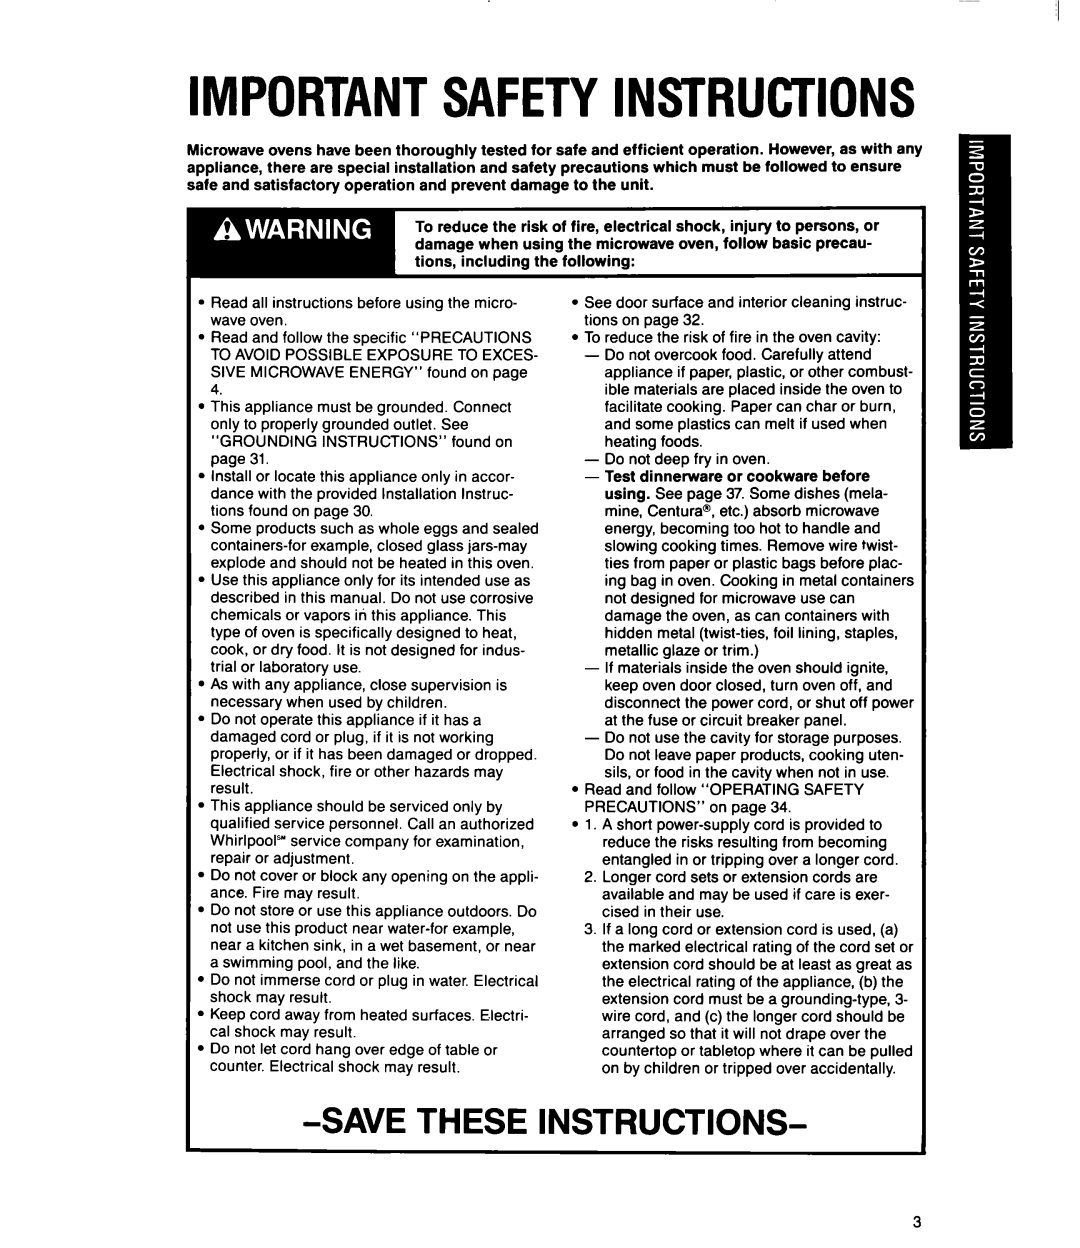 Whirlpool MT2100XY user manual Savethese Instructions, Importantsafetyinstructions 